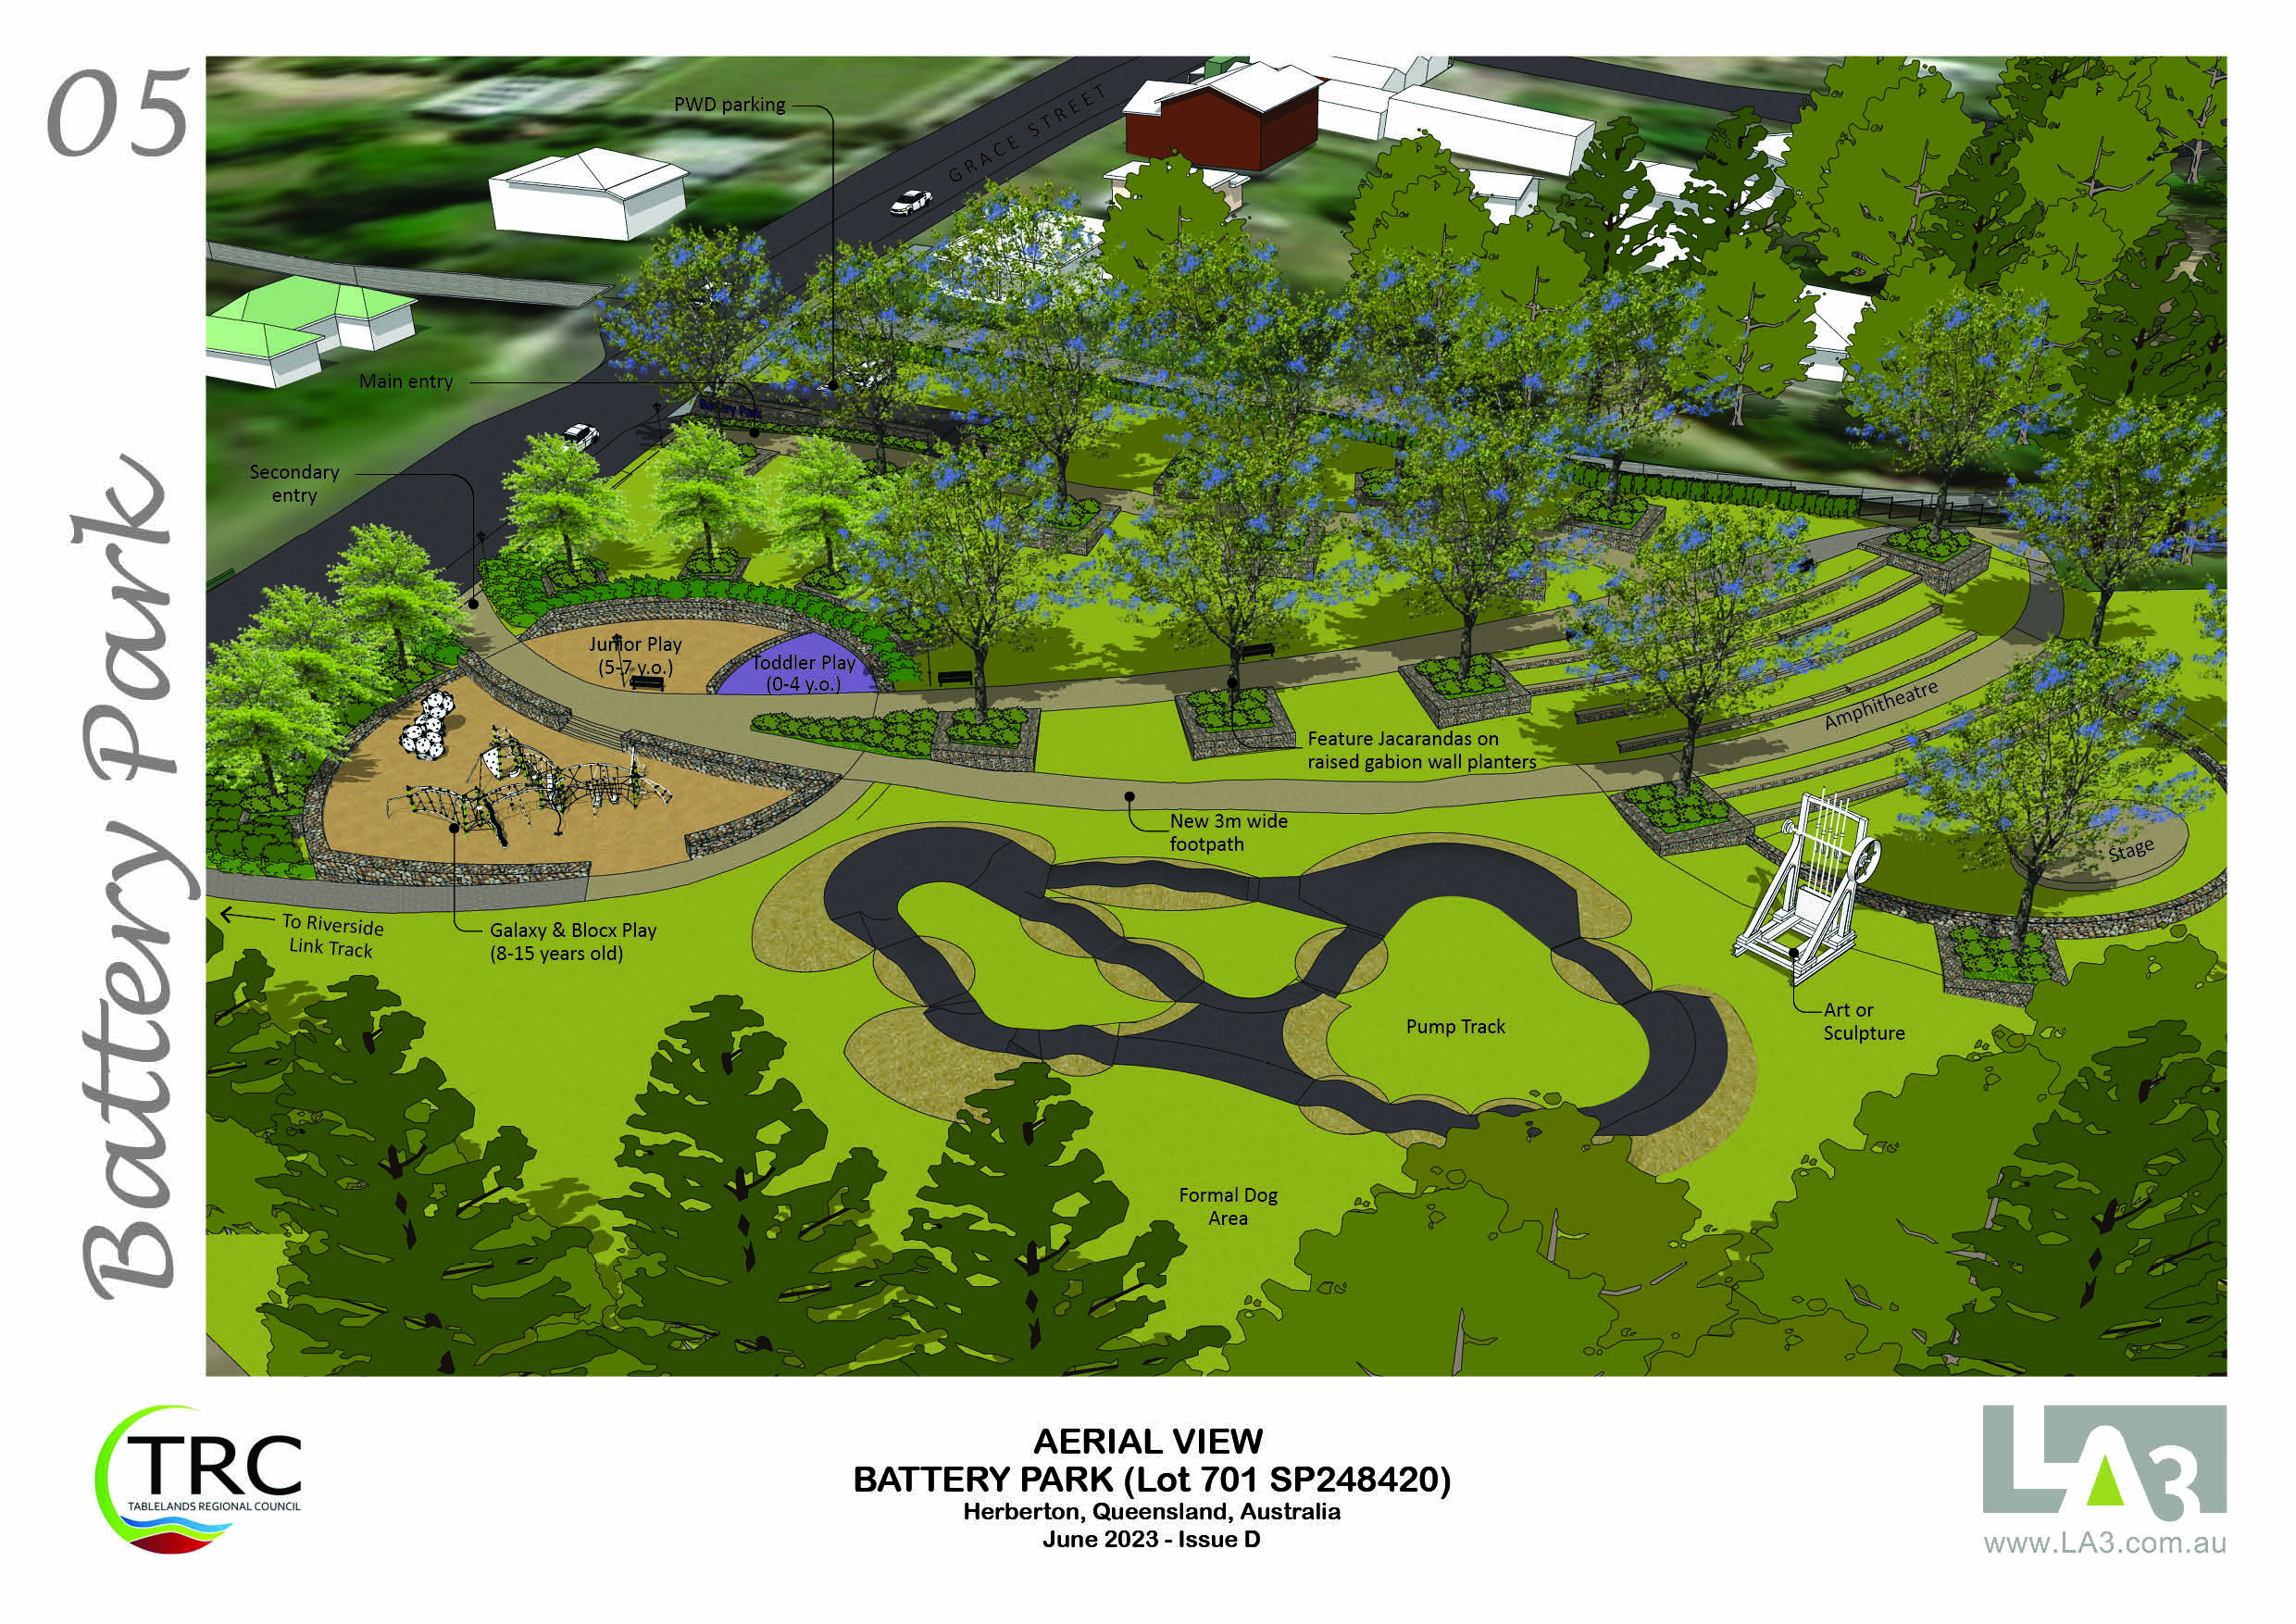 An aerial view artist impression of Herberton Battery Park